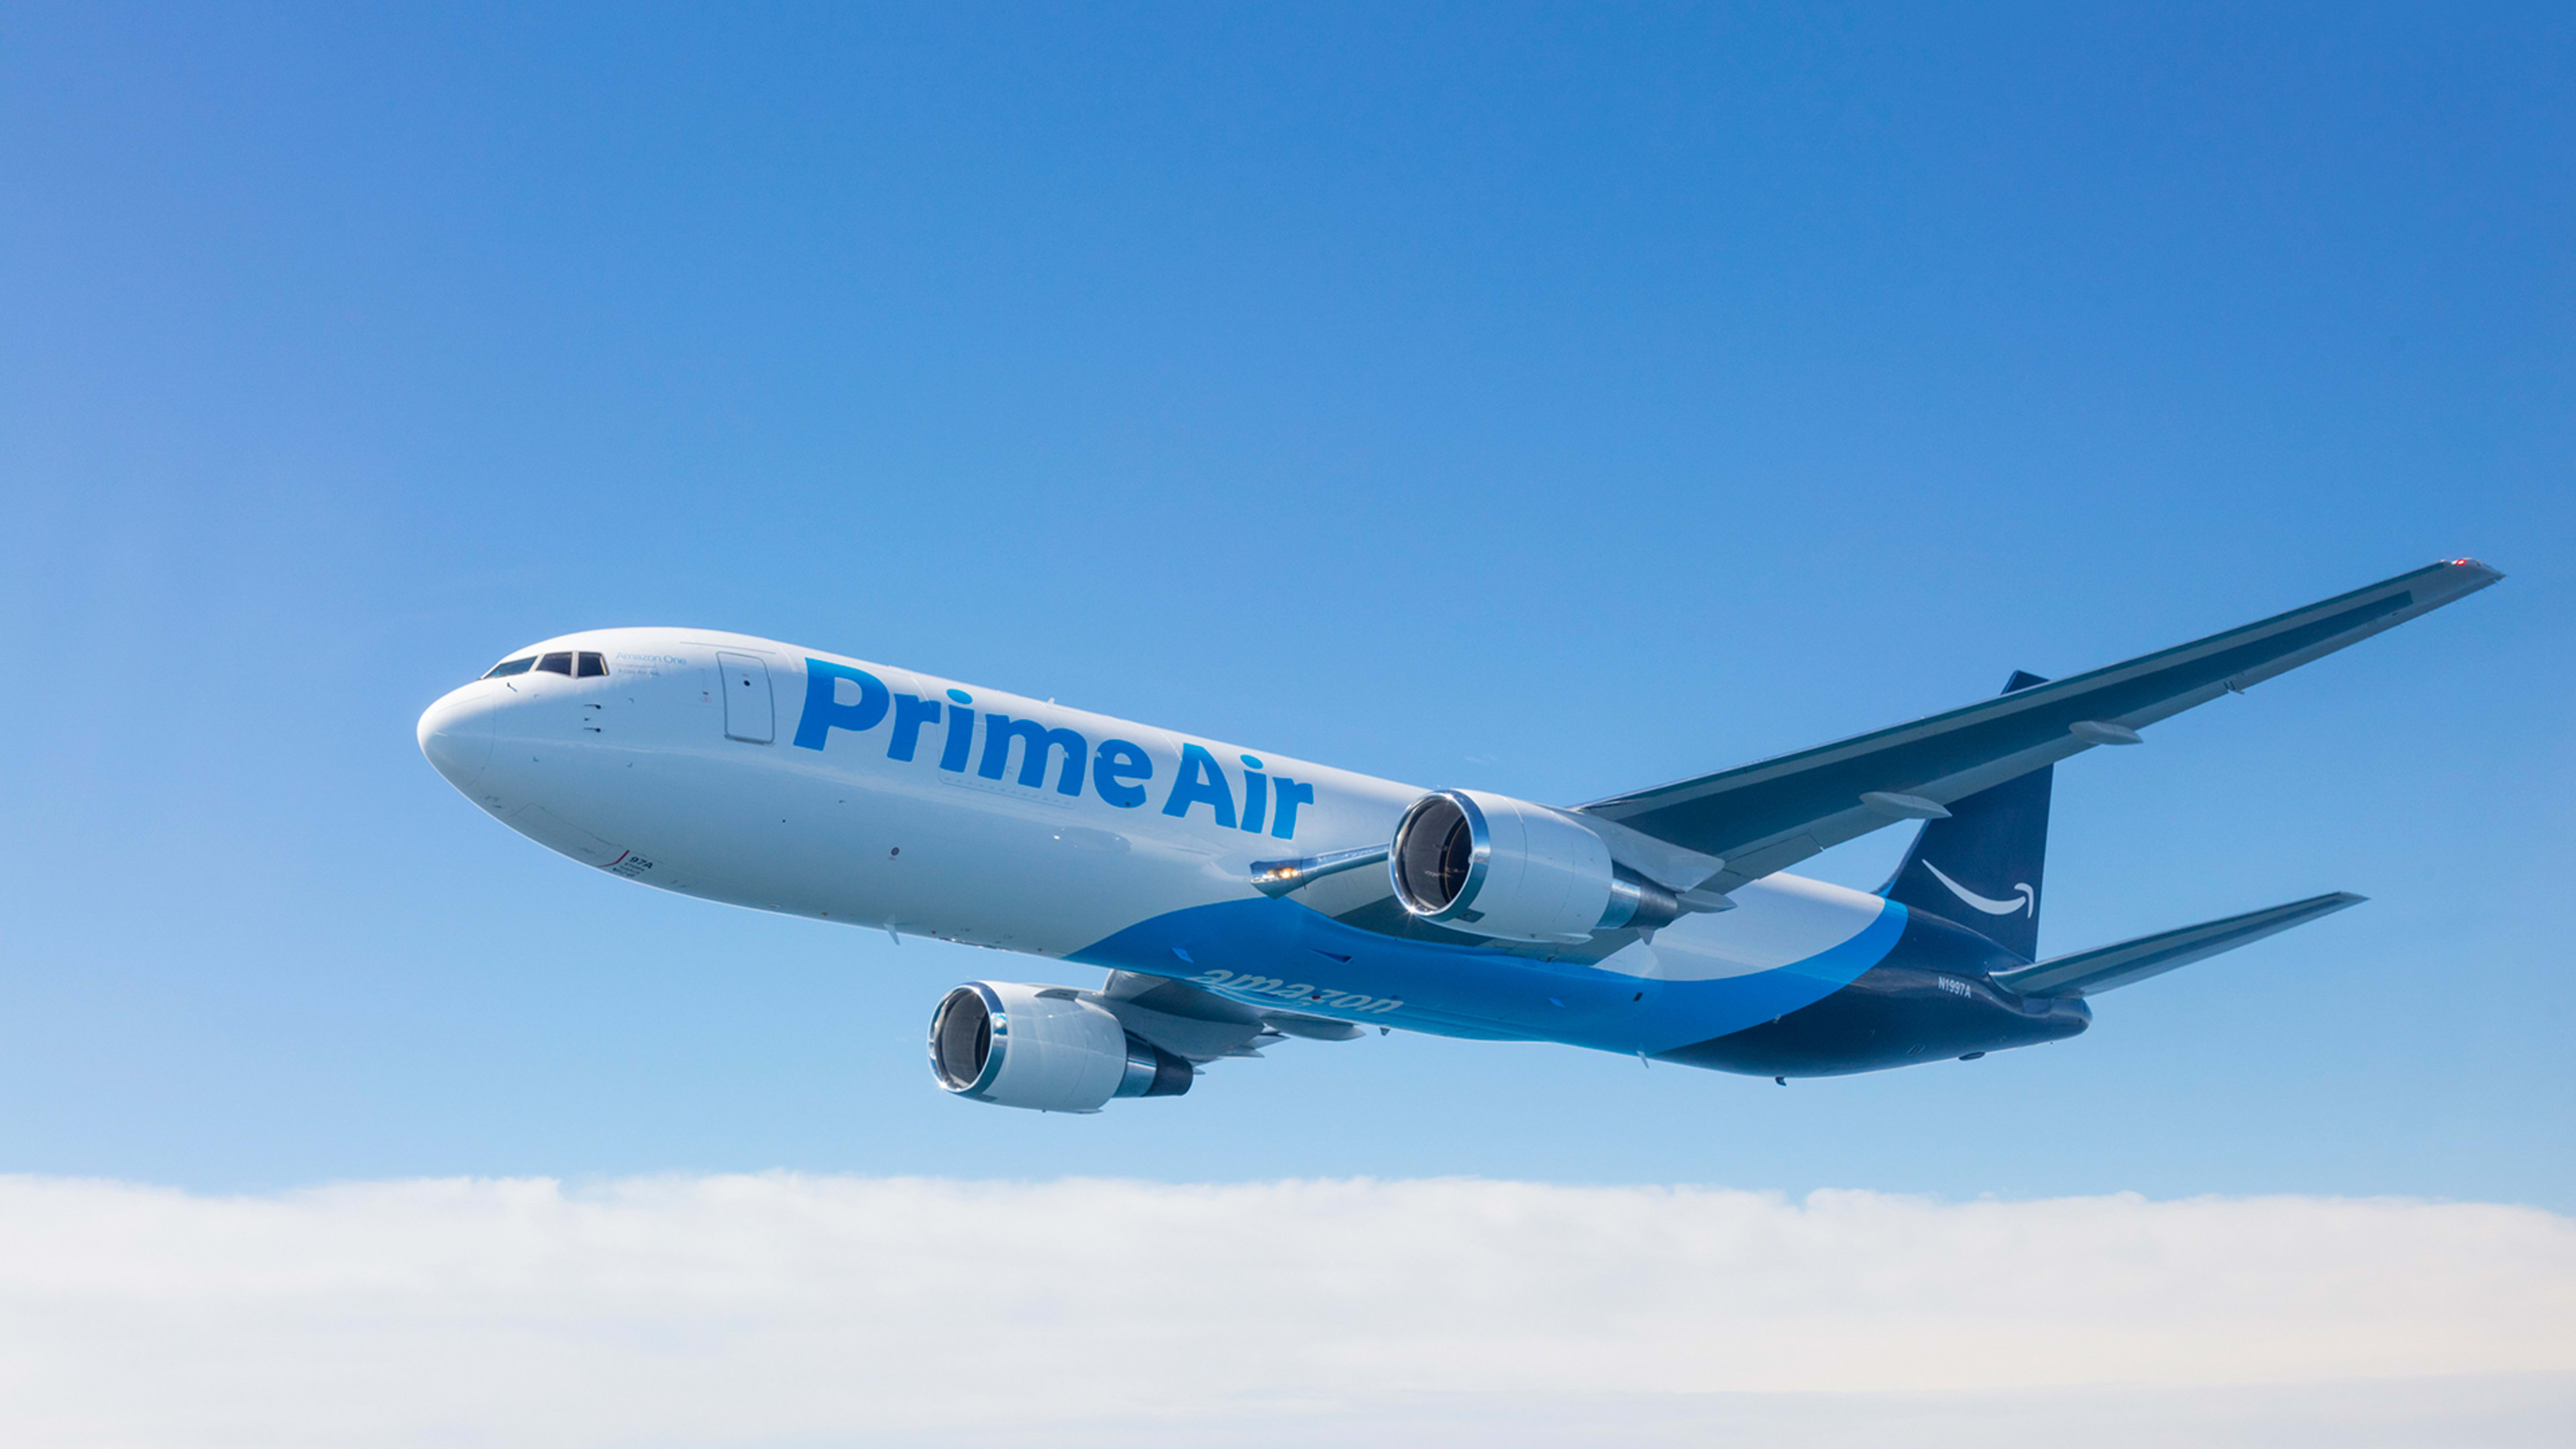 Amazon will spend $800M to bring free one-day shipping to Prime